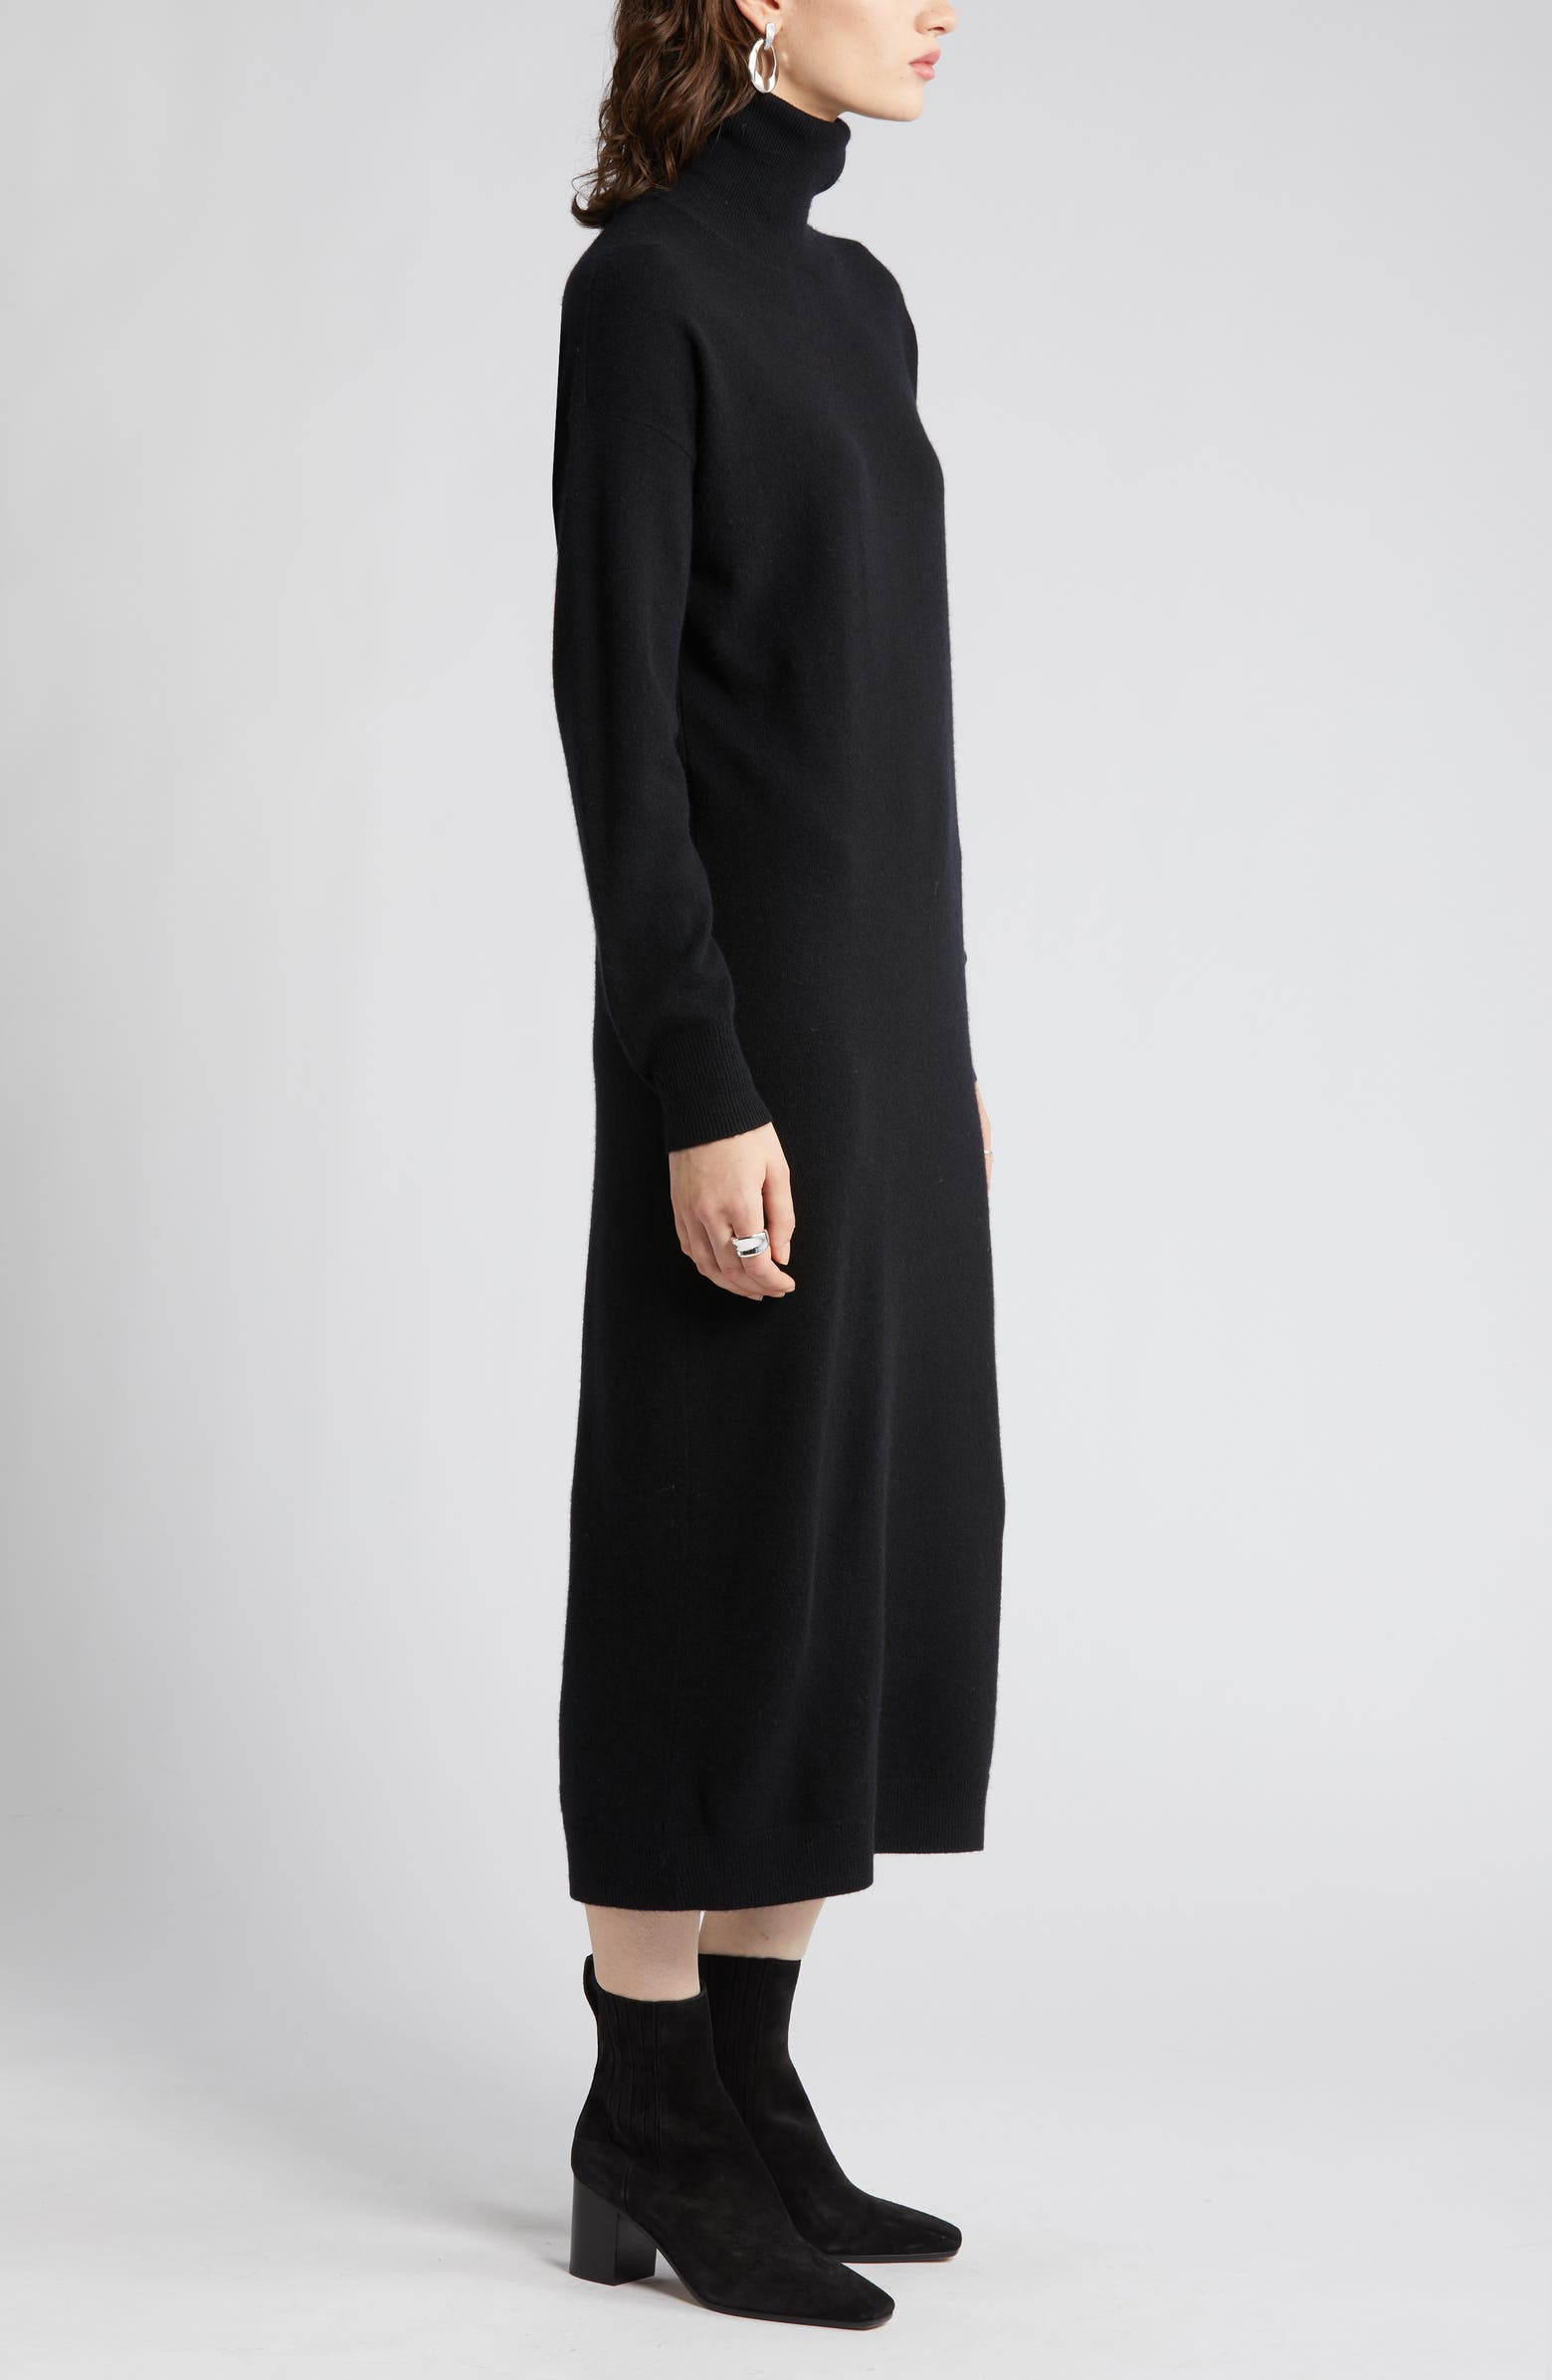 Nordstrom Long Sleeve Wool & Cashmere Sweater Dress | Nordstrom